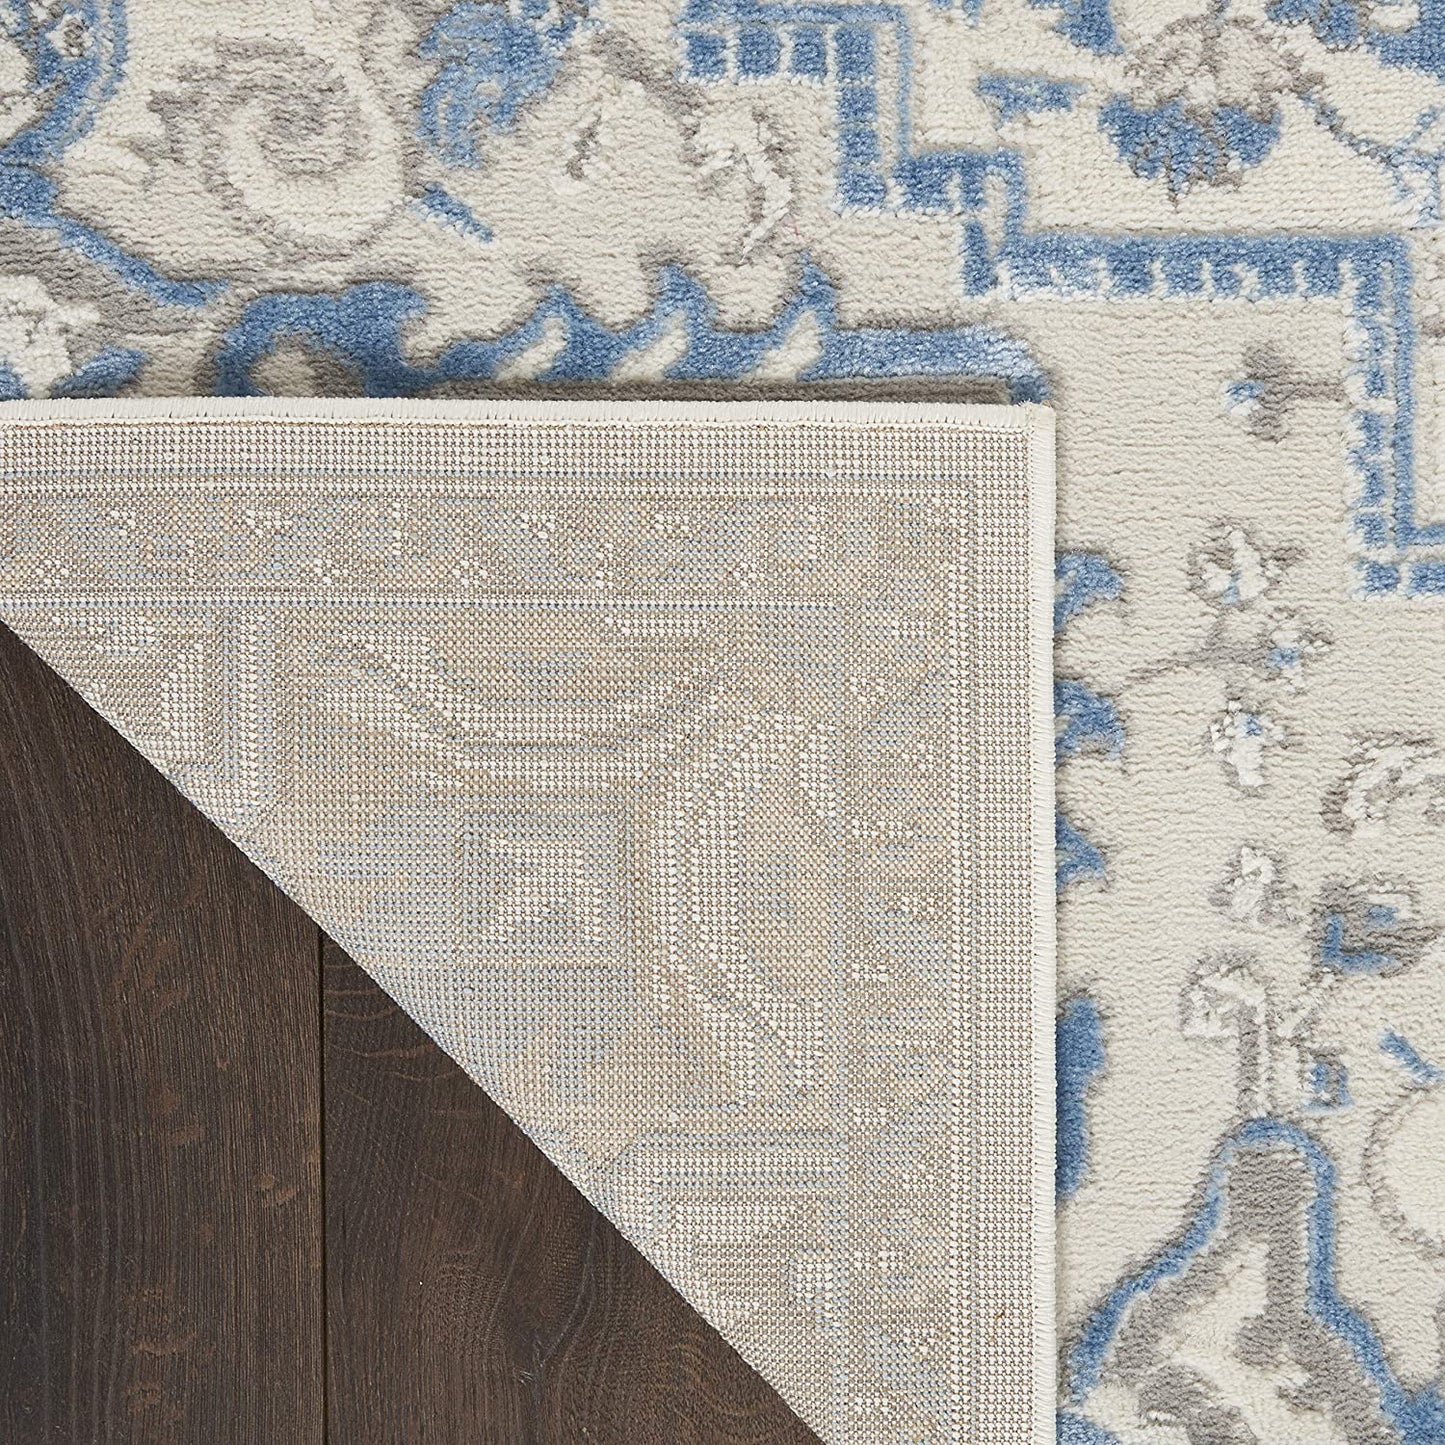 Persian Floral Traditional Ivory Blue Soft Area Rug